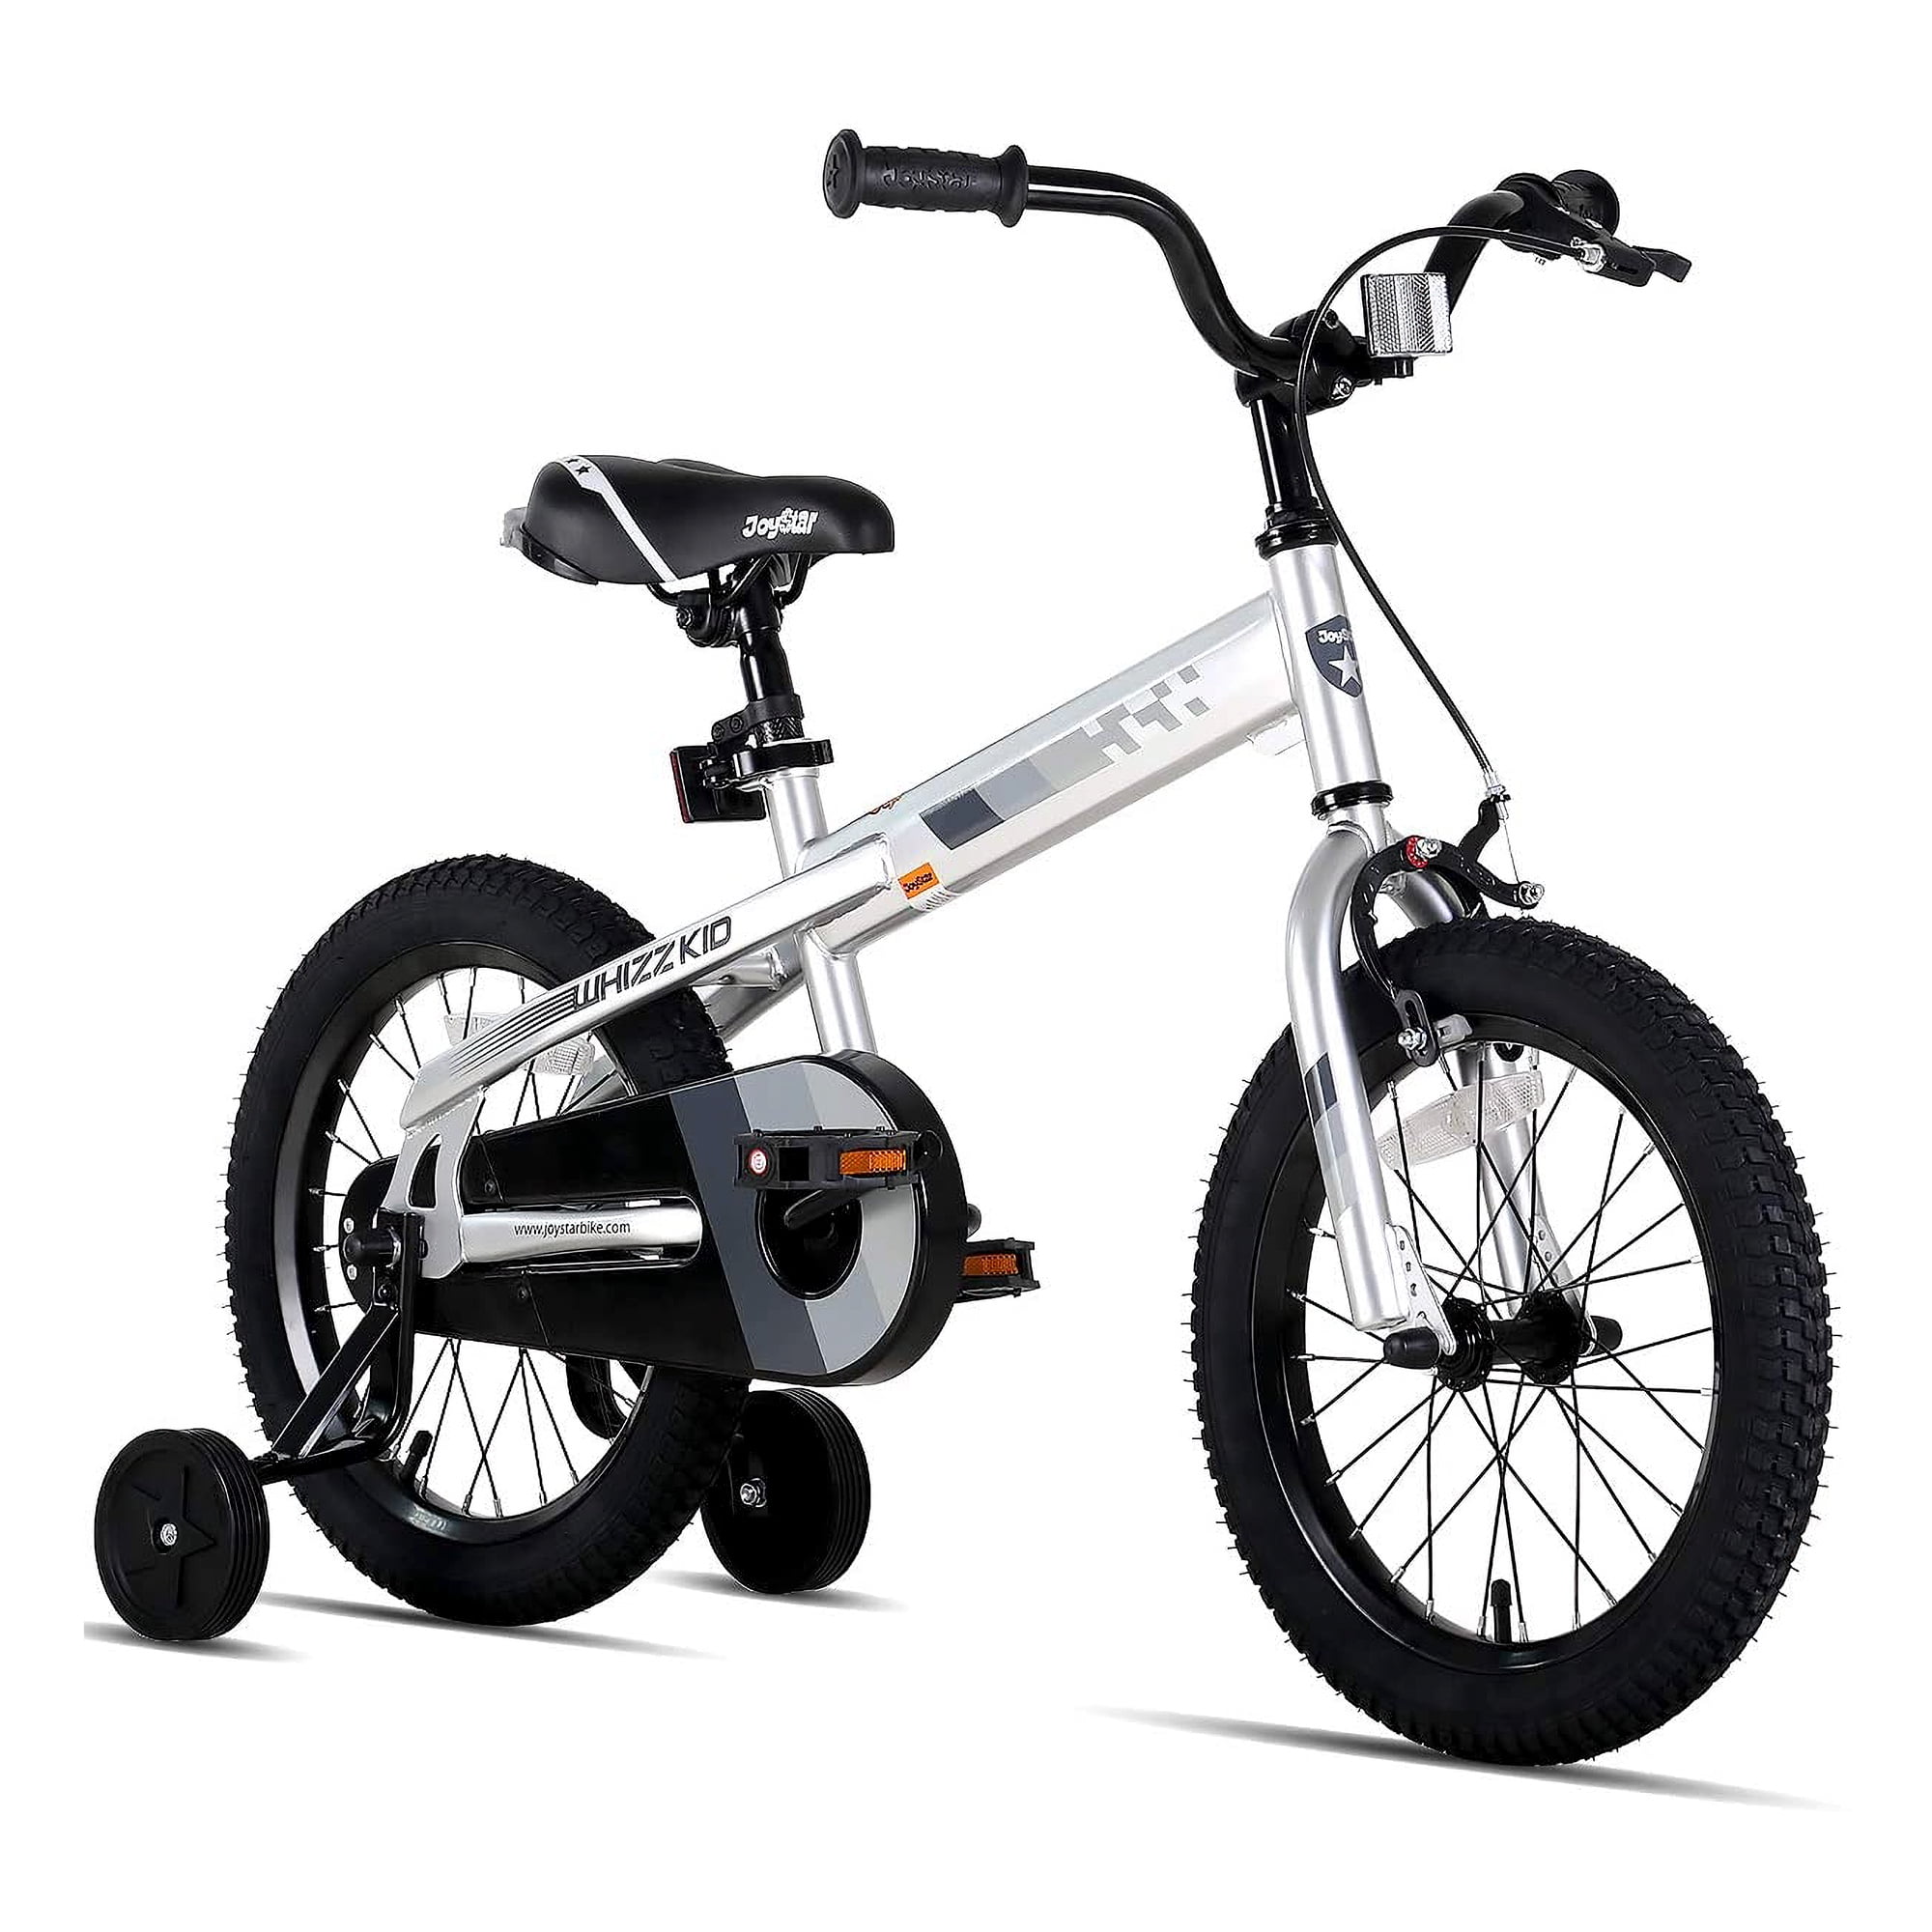 Details about   Kids Bike Training Wheels Bicycle Stabilizers Kit for 12 14 16 18 20 inch Bike 